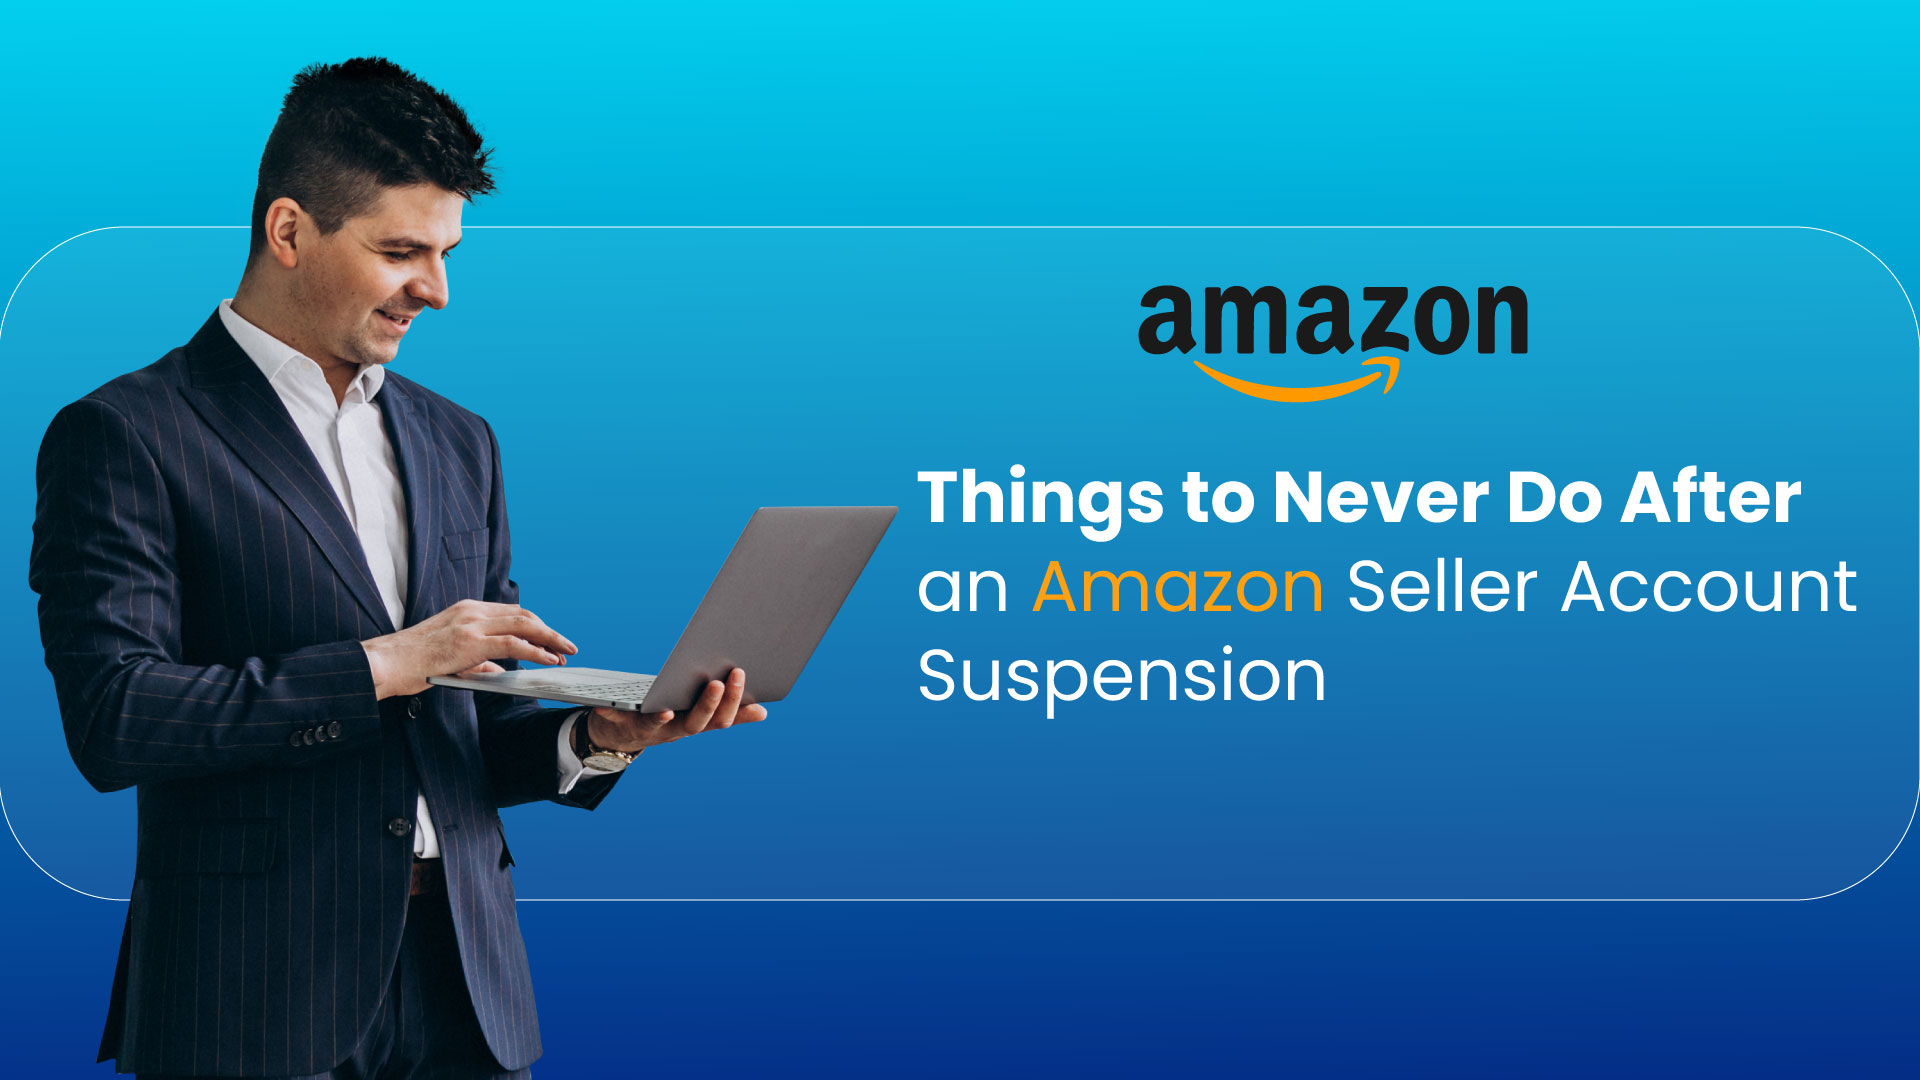 Things to Never Do After an Amazon Seller Account Suspension